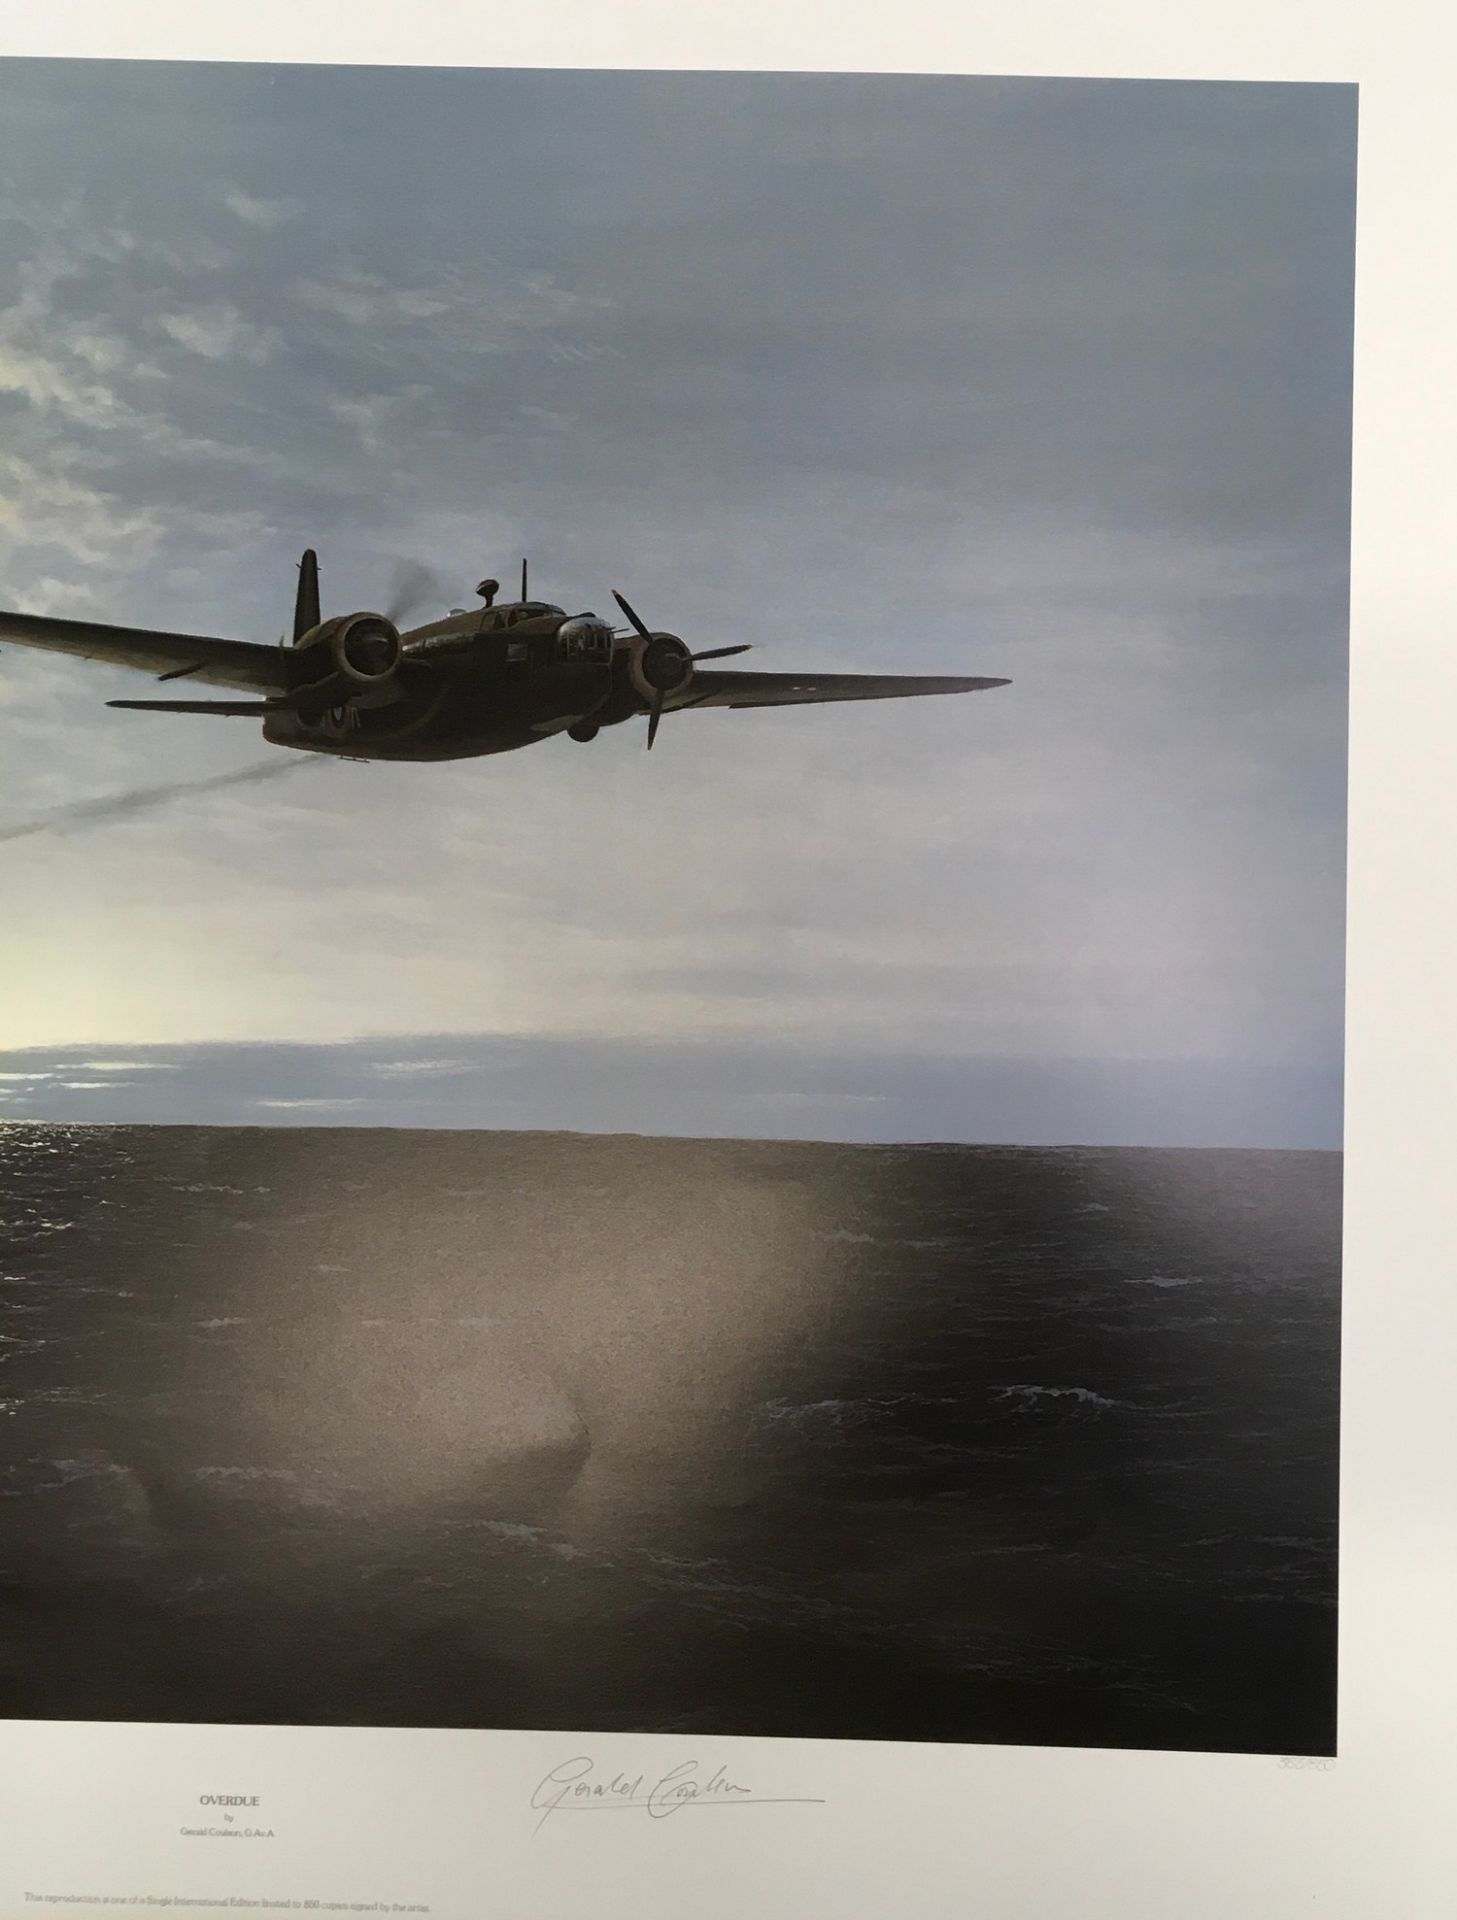 Overdue a ltd edition second WW study of RAF airplane by Gerald Coulson with indentation stamp - Image 3 of 6